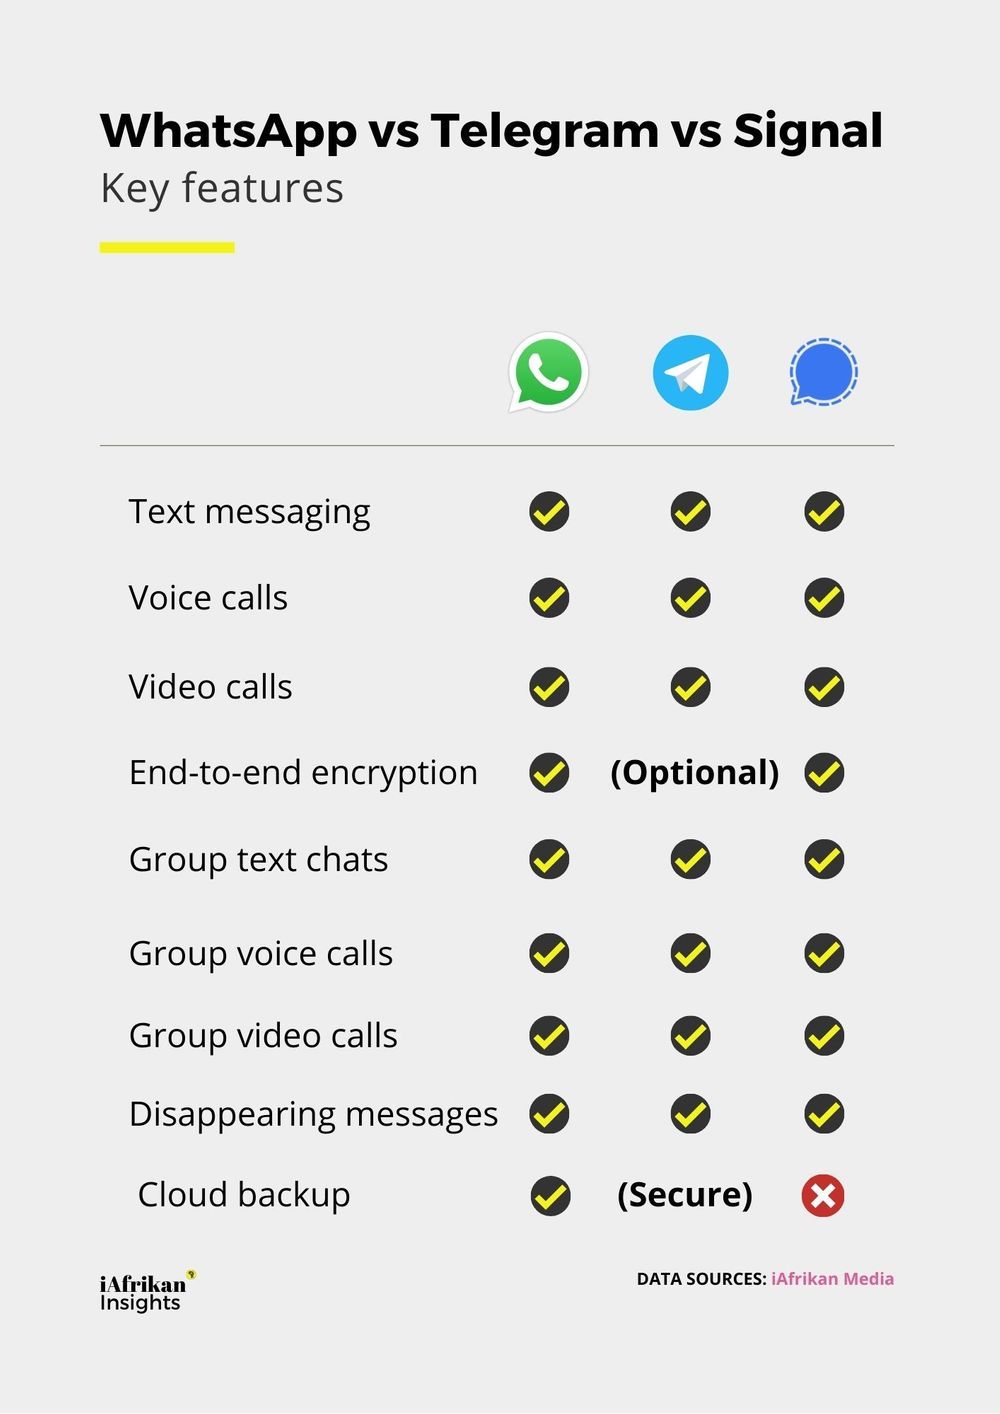 Key features of Whatsapp, Telegram, and Signal.